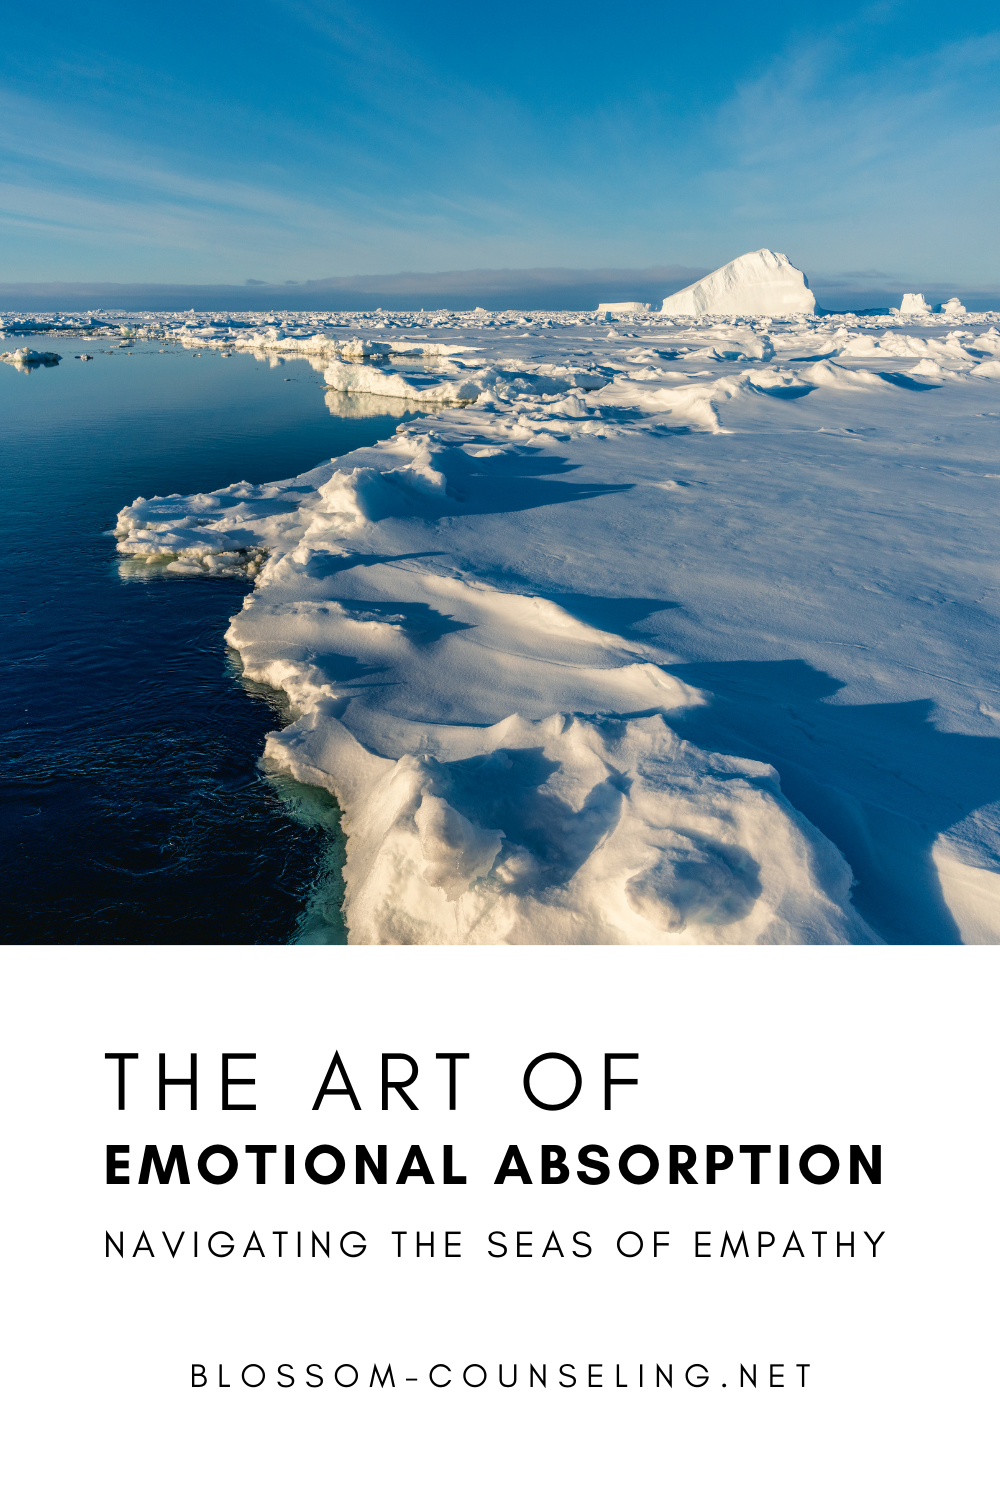 The Art of Emotional Absorption: Navigating the Seas of Empathy